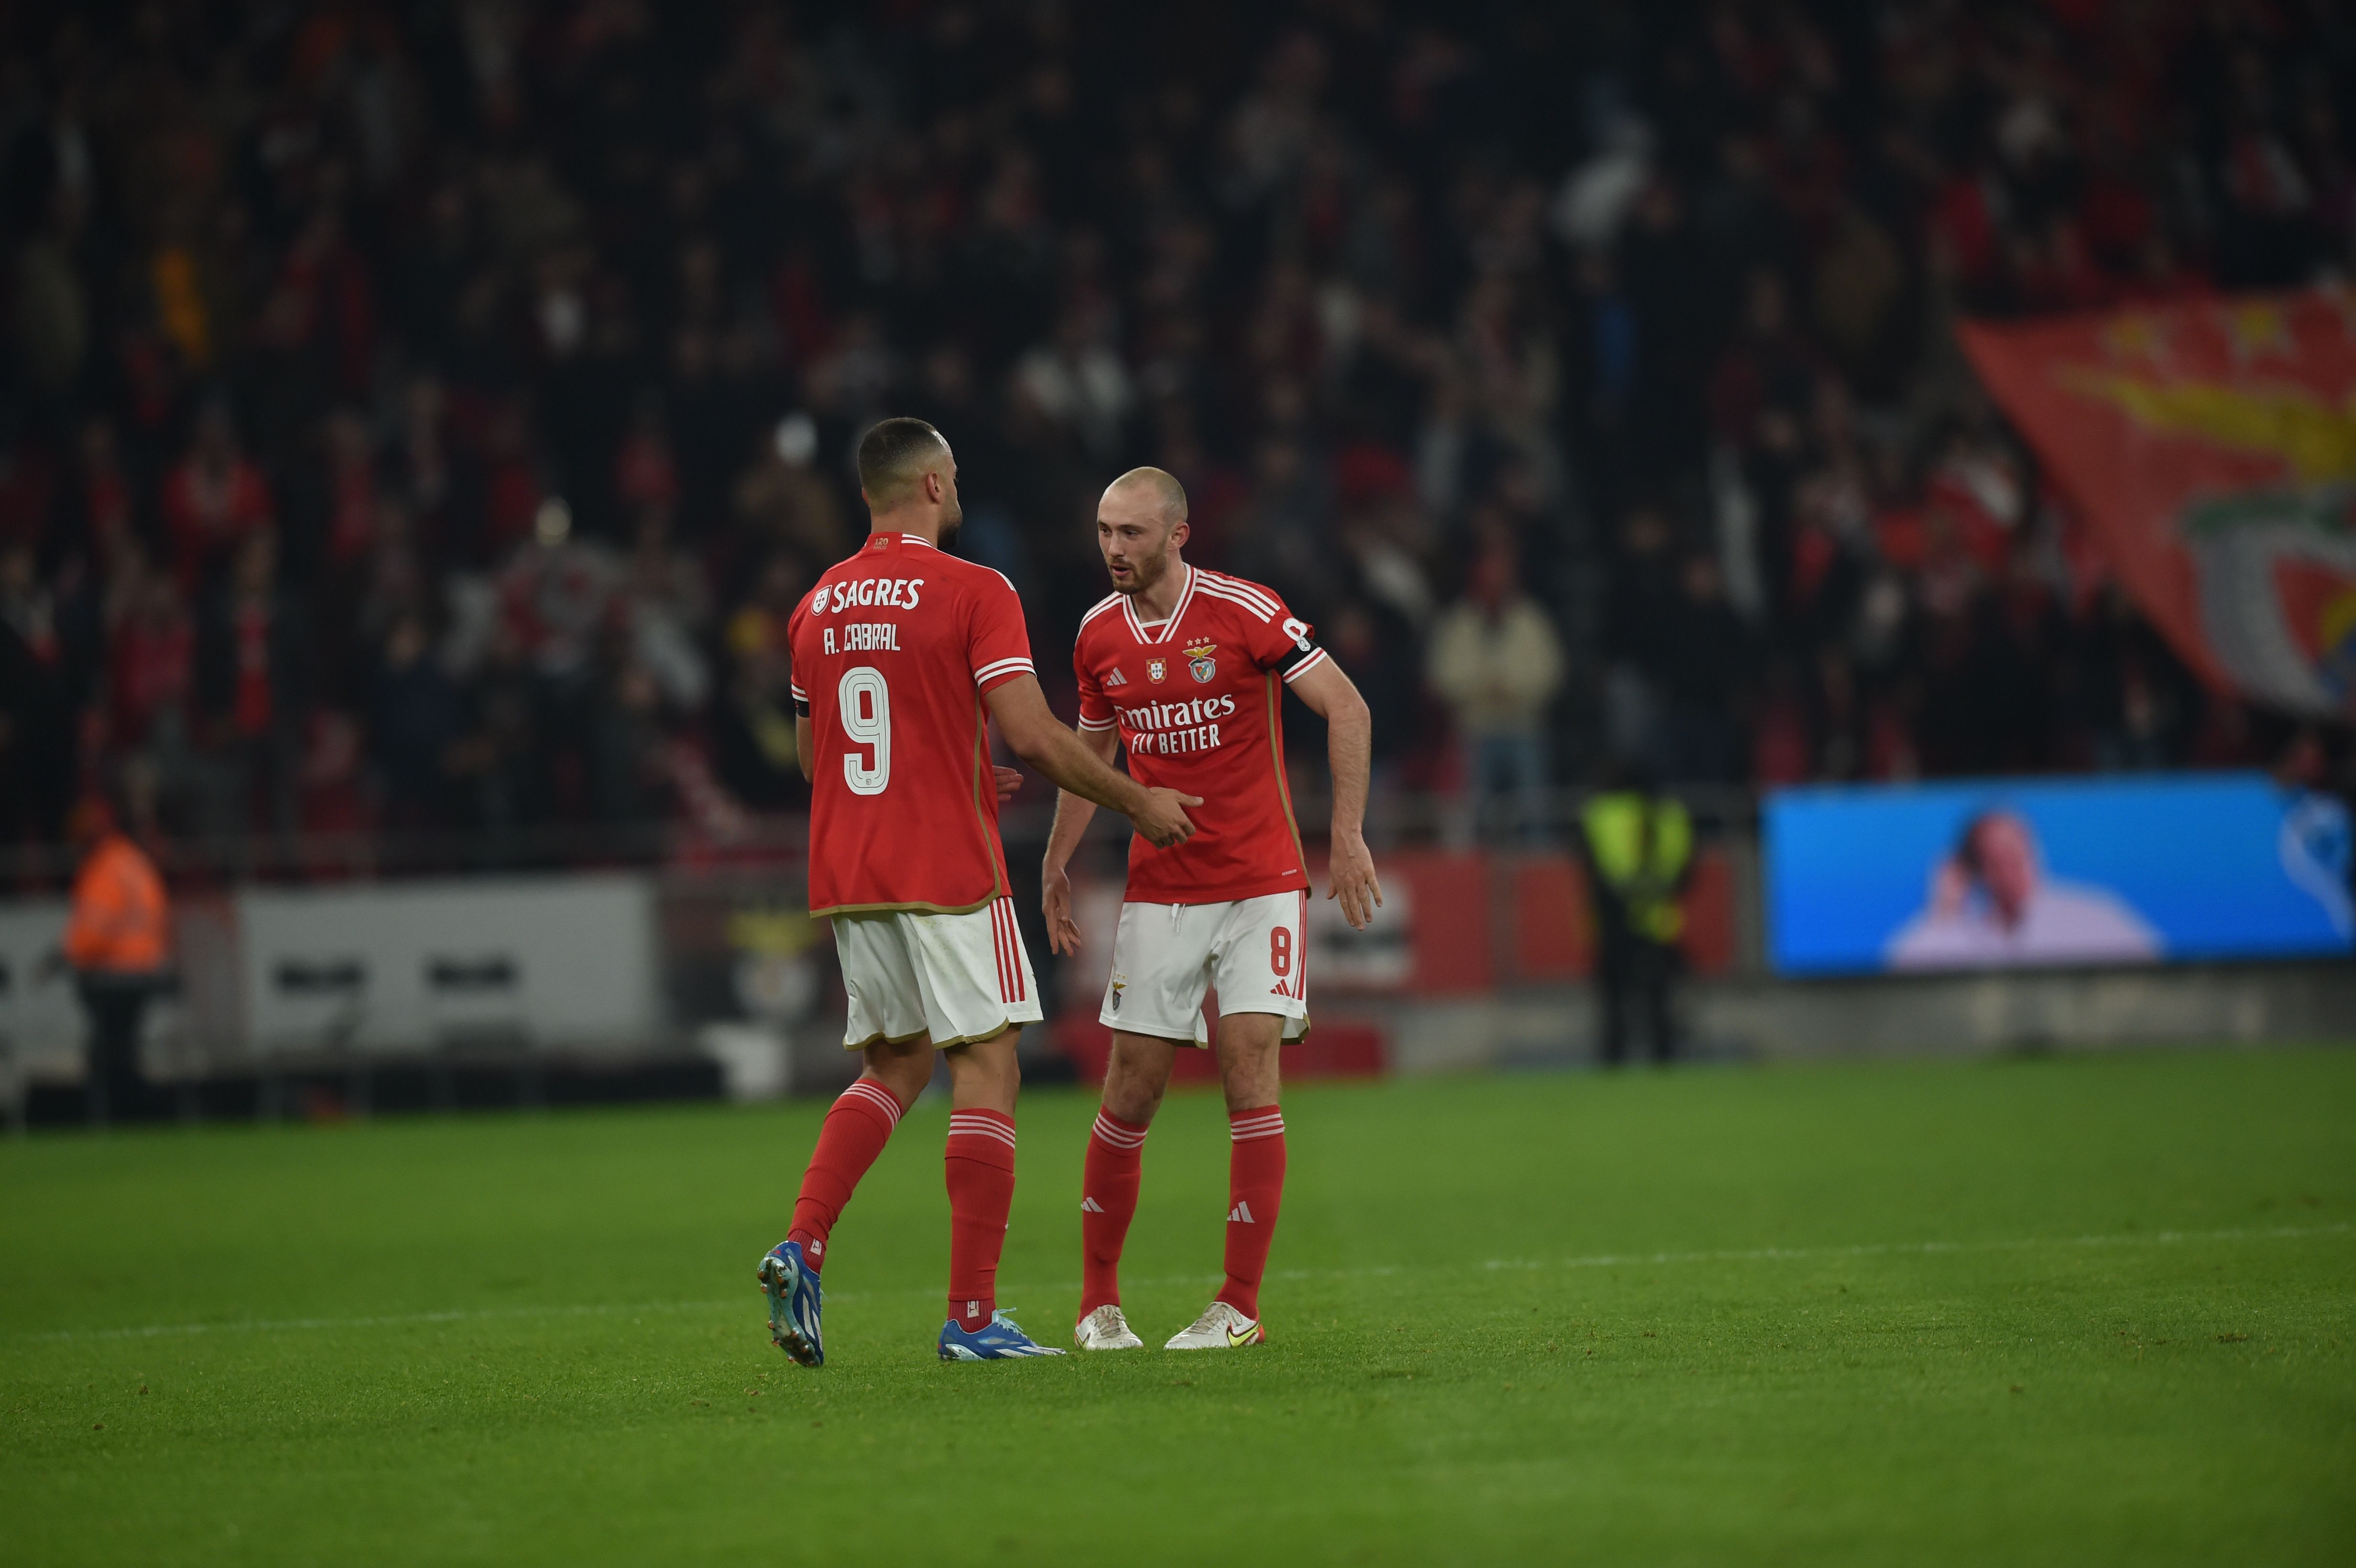 Arthur Cabral deals with the logic and Benfica advances in the cup